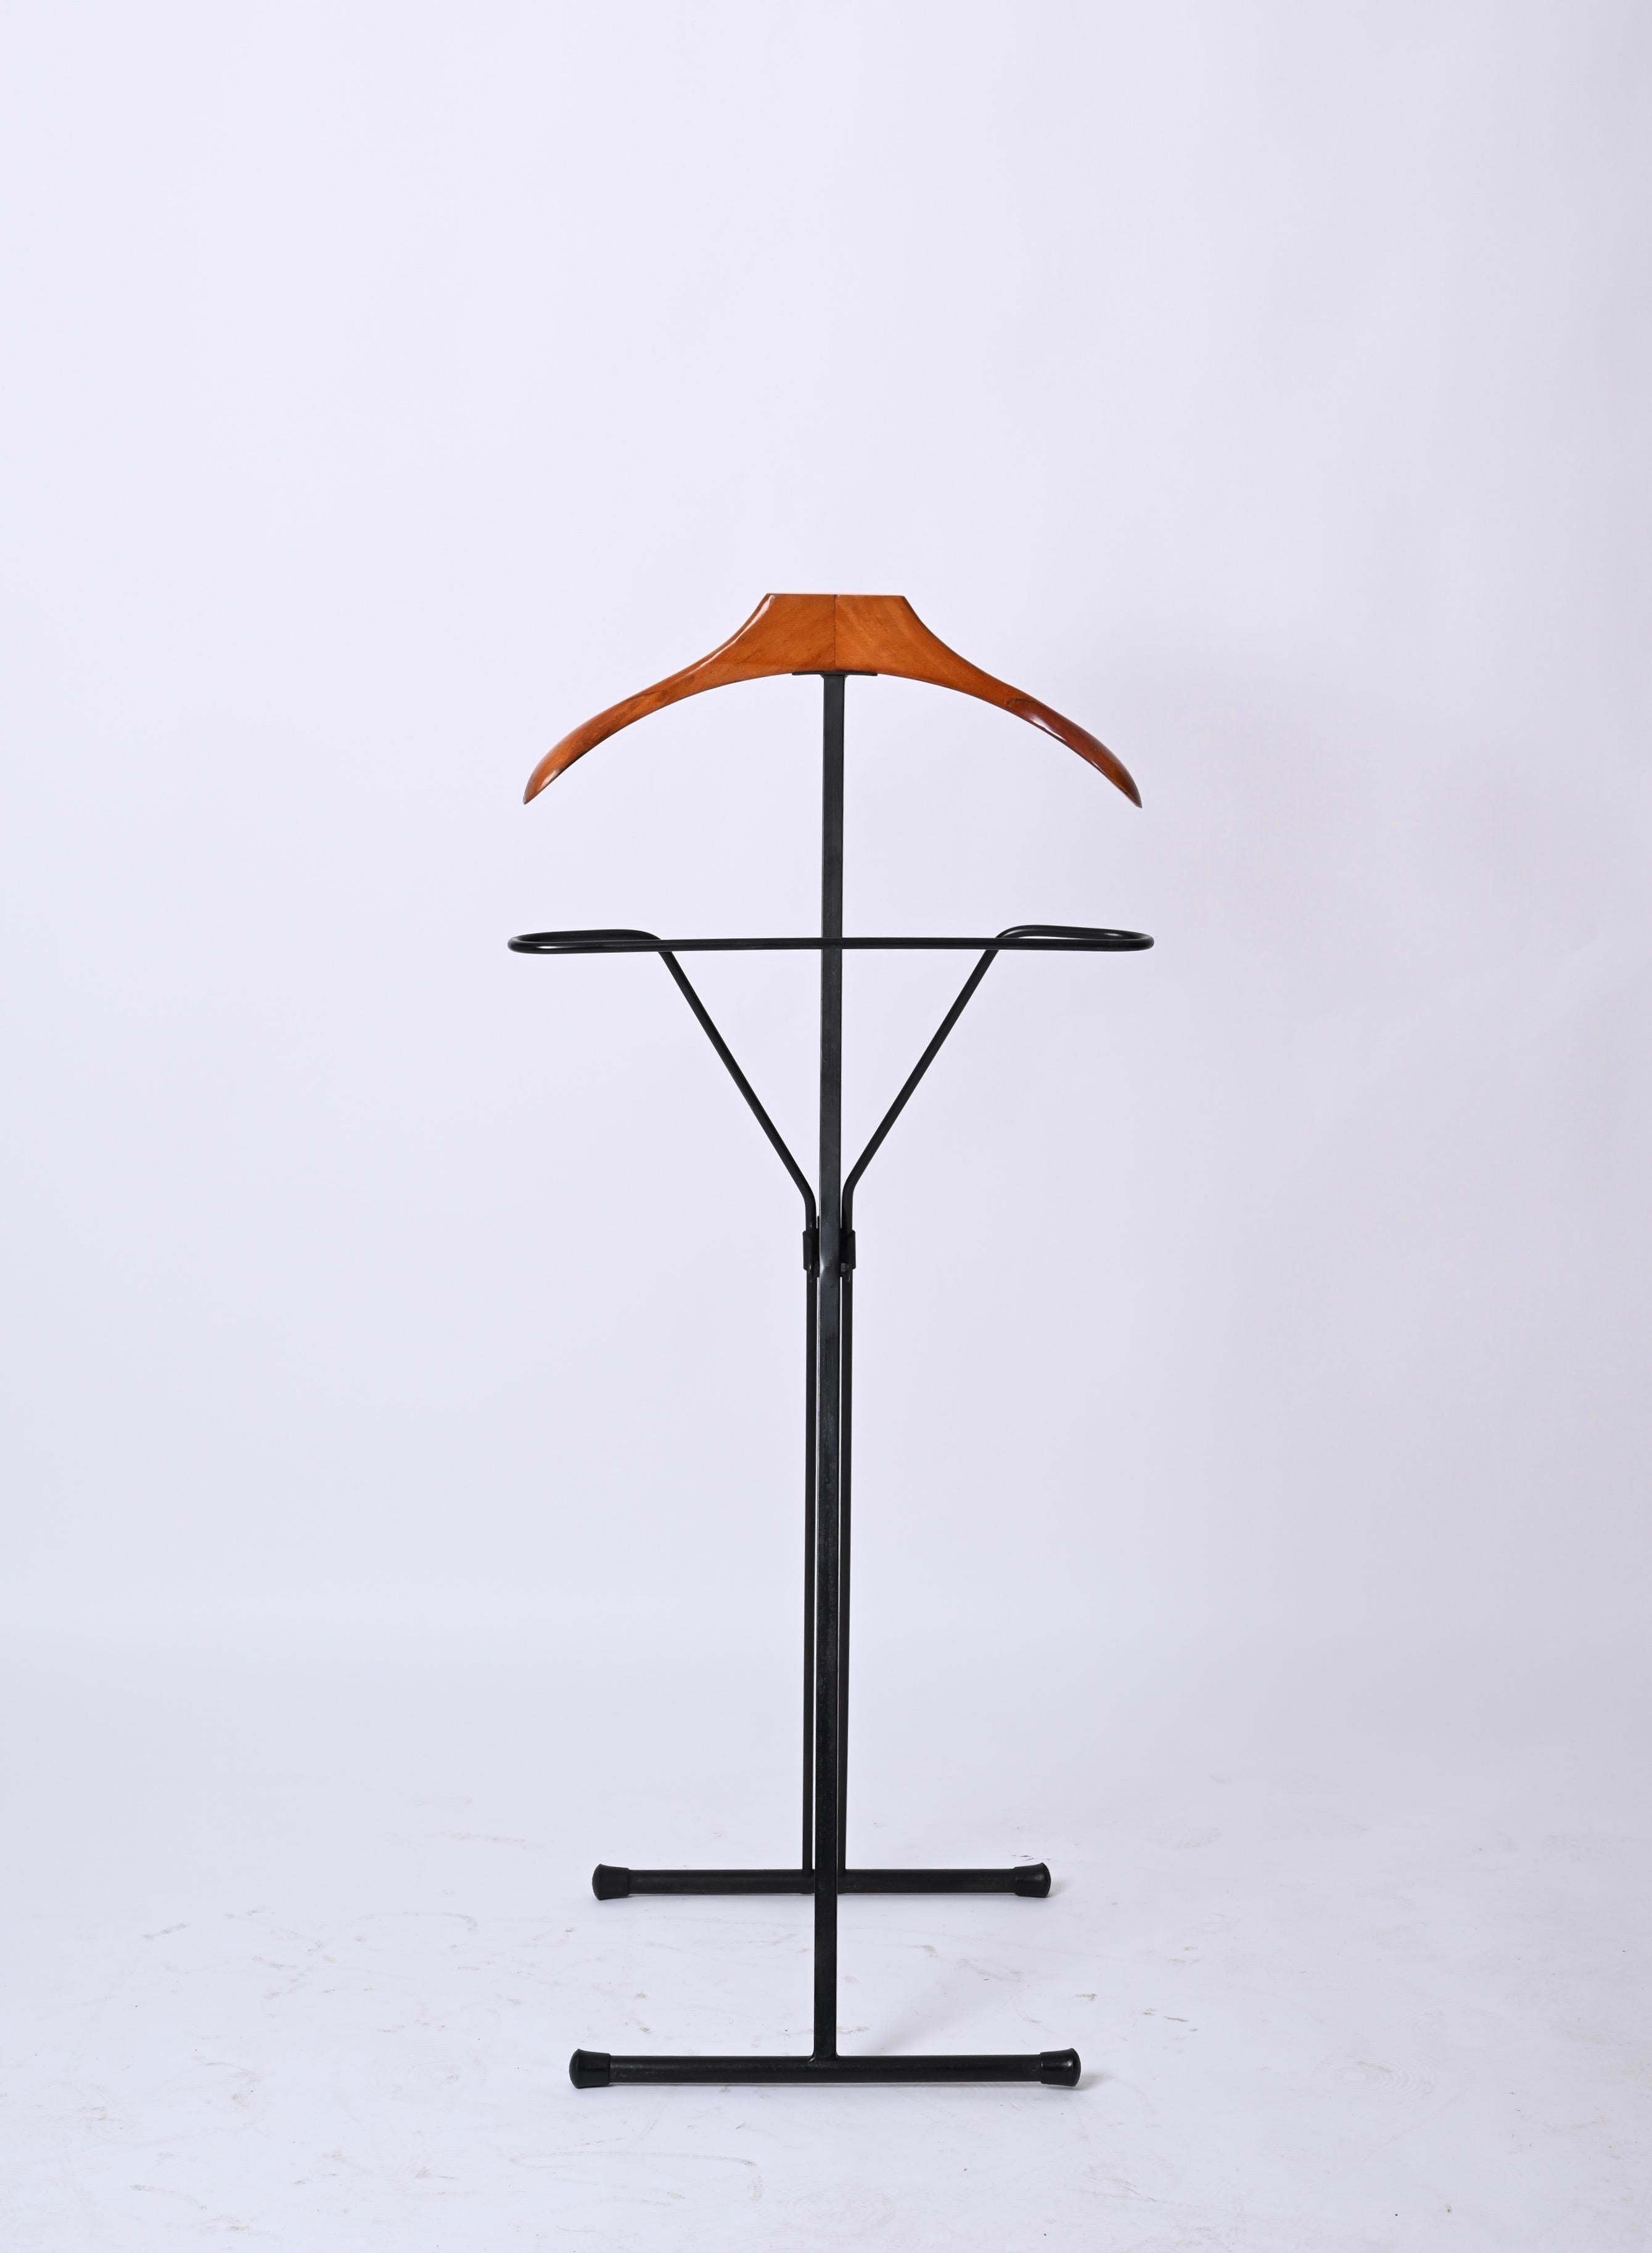 Enameled Mid-Century Iron and Beech Wood Italian Foldable Valet Stand, Italy 1960s For Sale